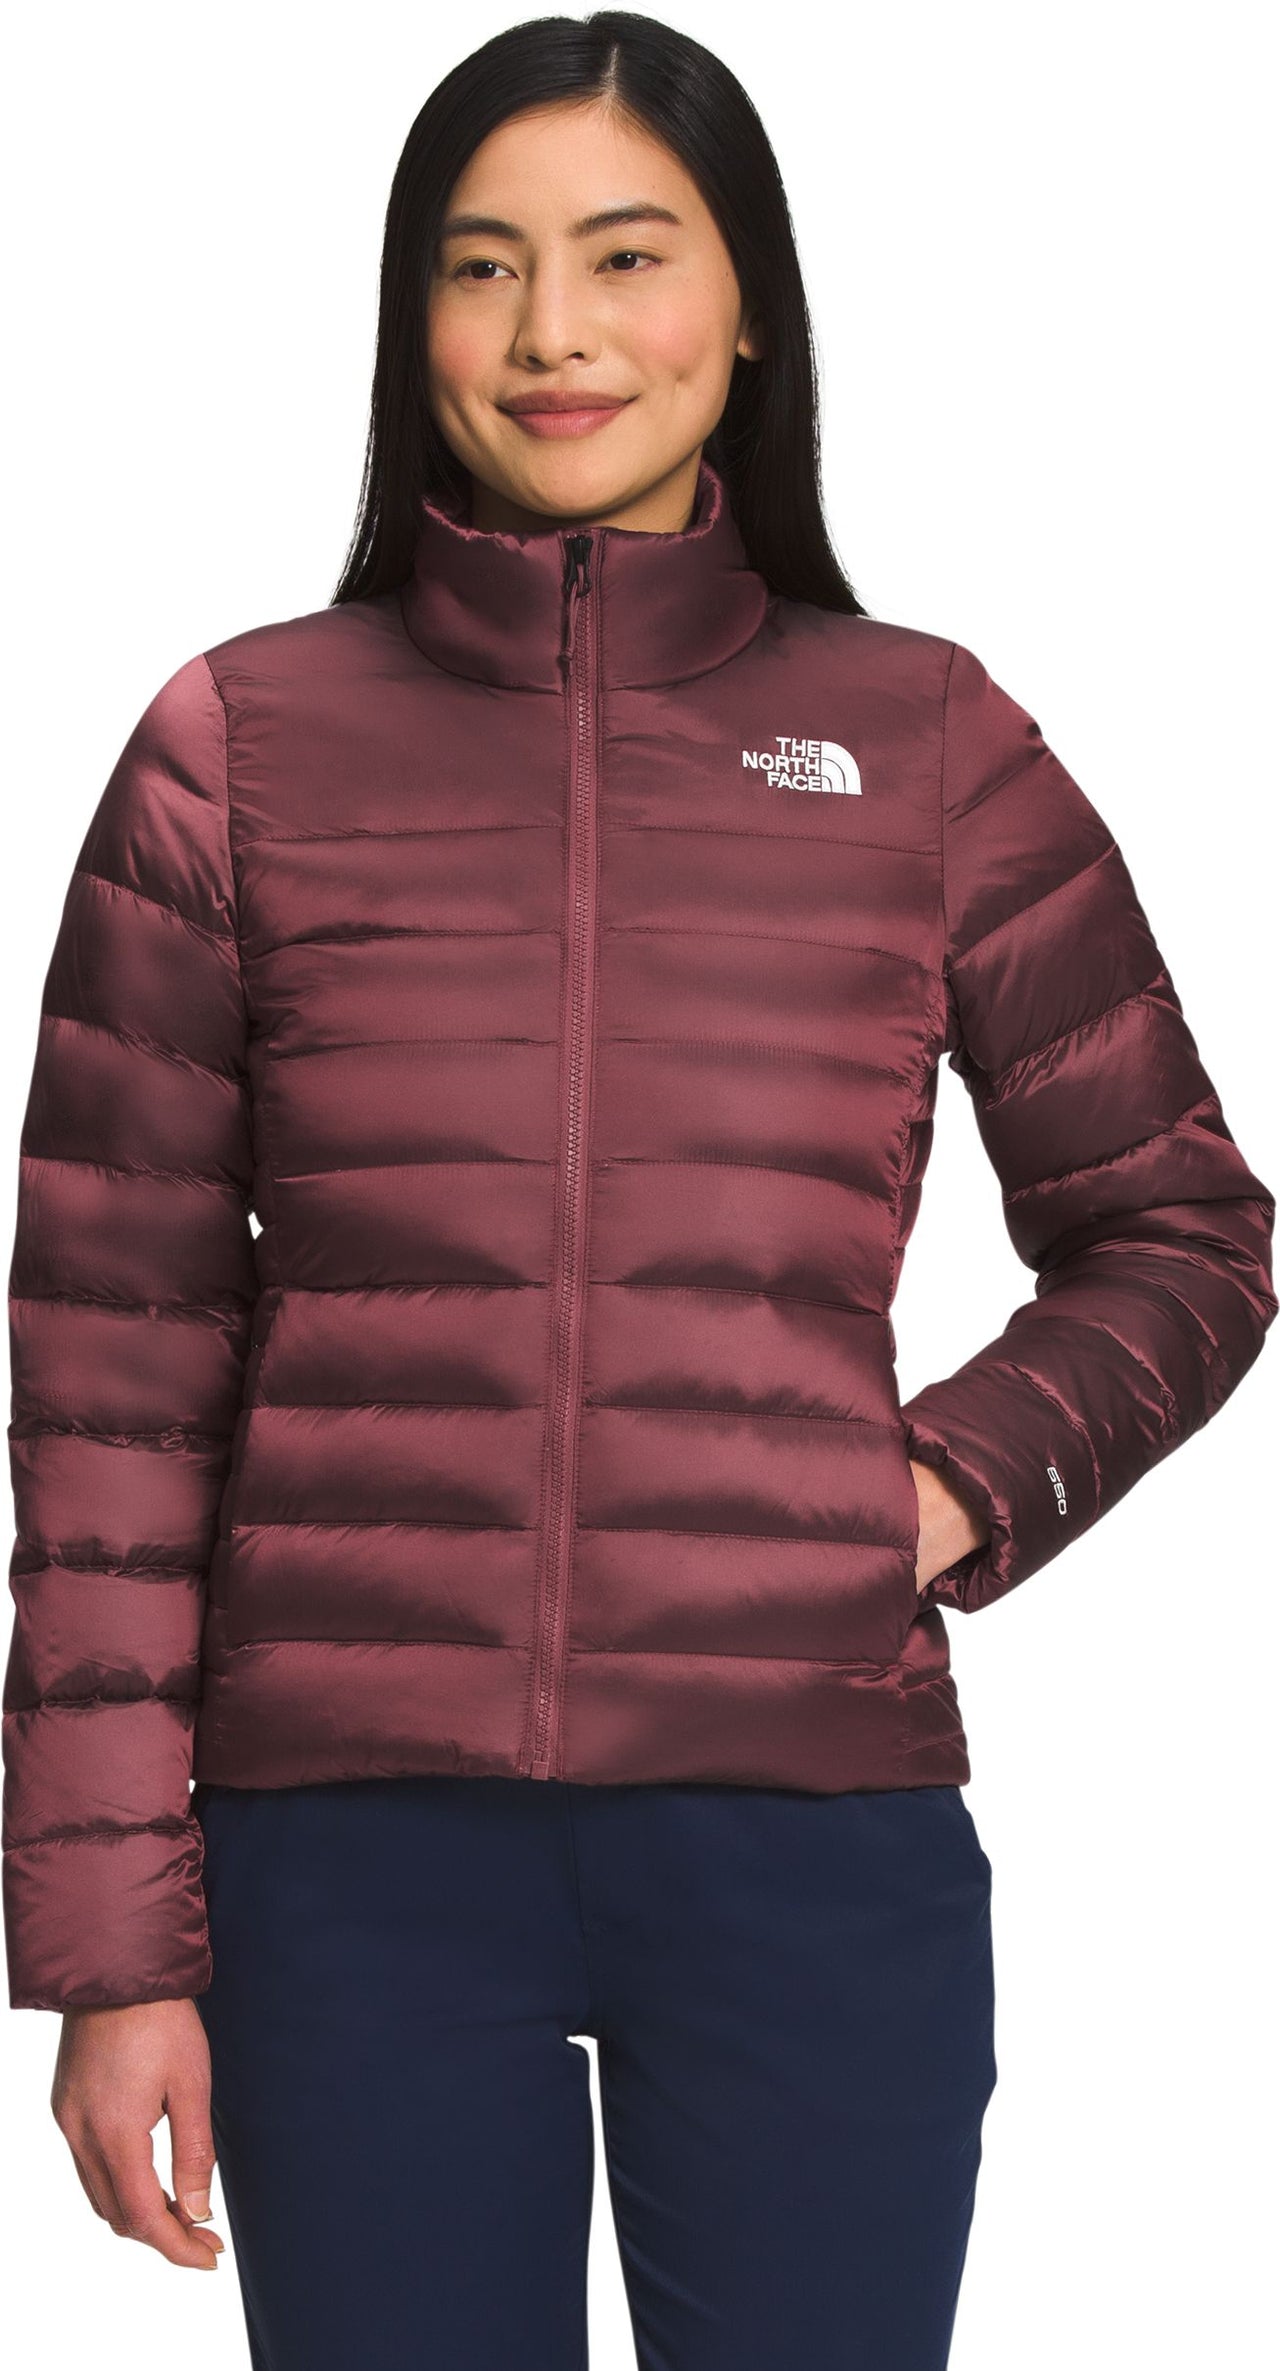 The North Face Apparel Women's Aconcagua Jacket Wild Ginger